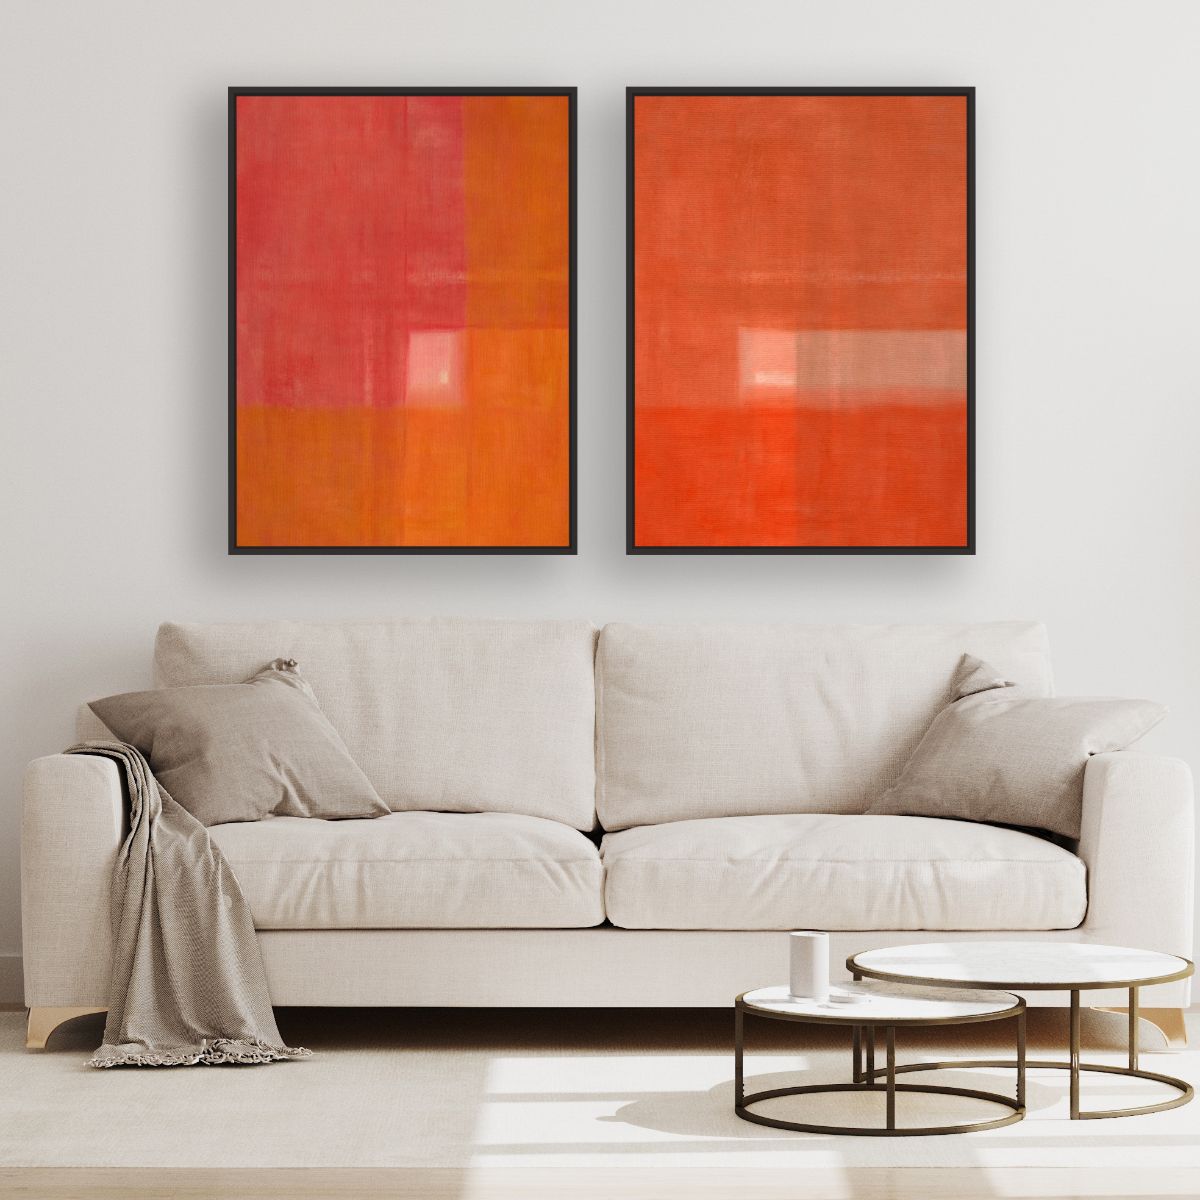 Sunshine large canvas framed 2 piece large canvas wall art piece for sale at Vybe Interior